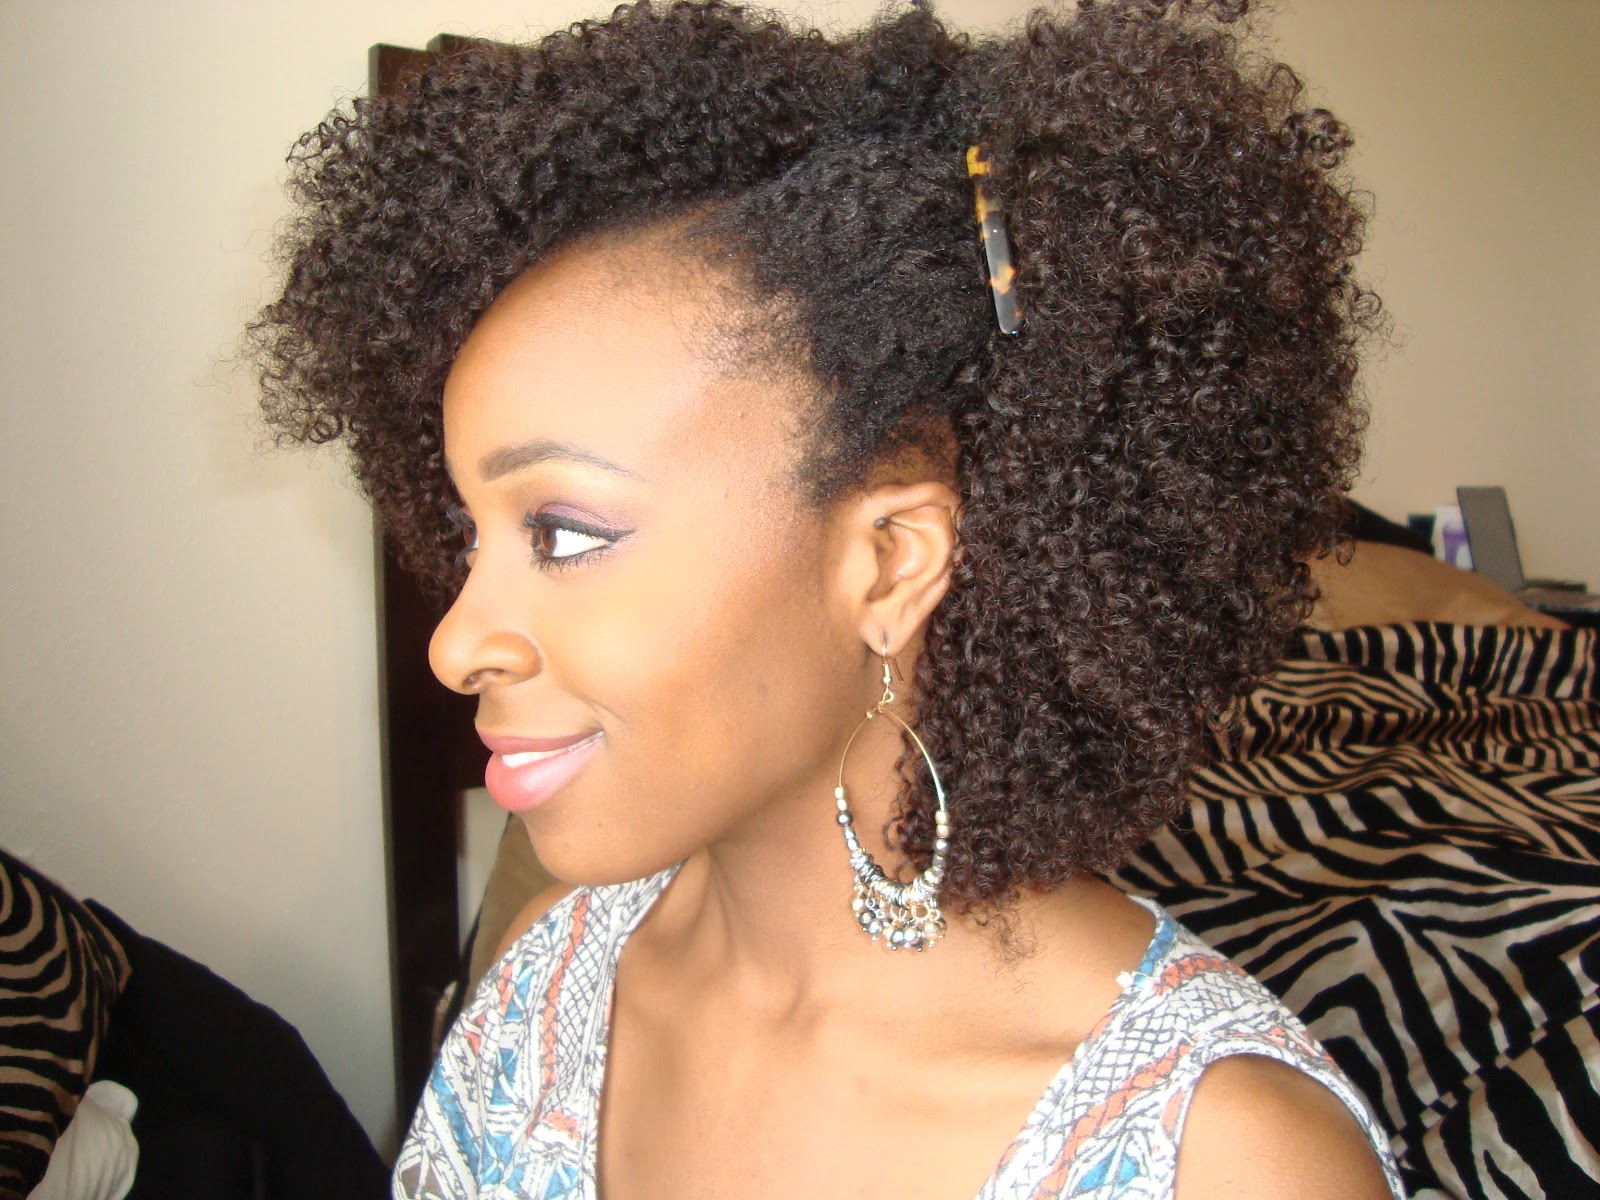 ... African Queens: Spring/ Summer time hair: ONYC Tight Kinky Curly 3C-4A